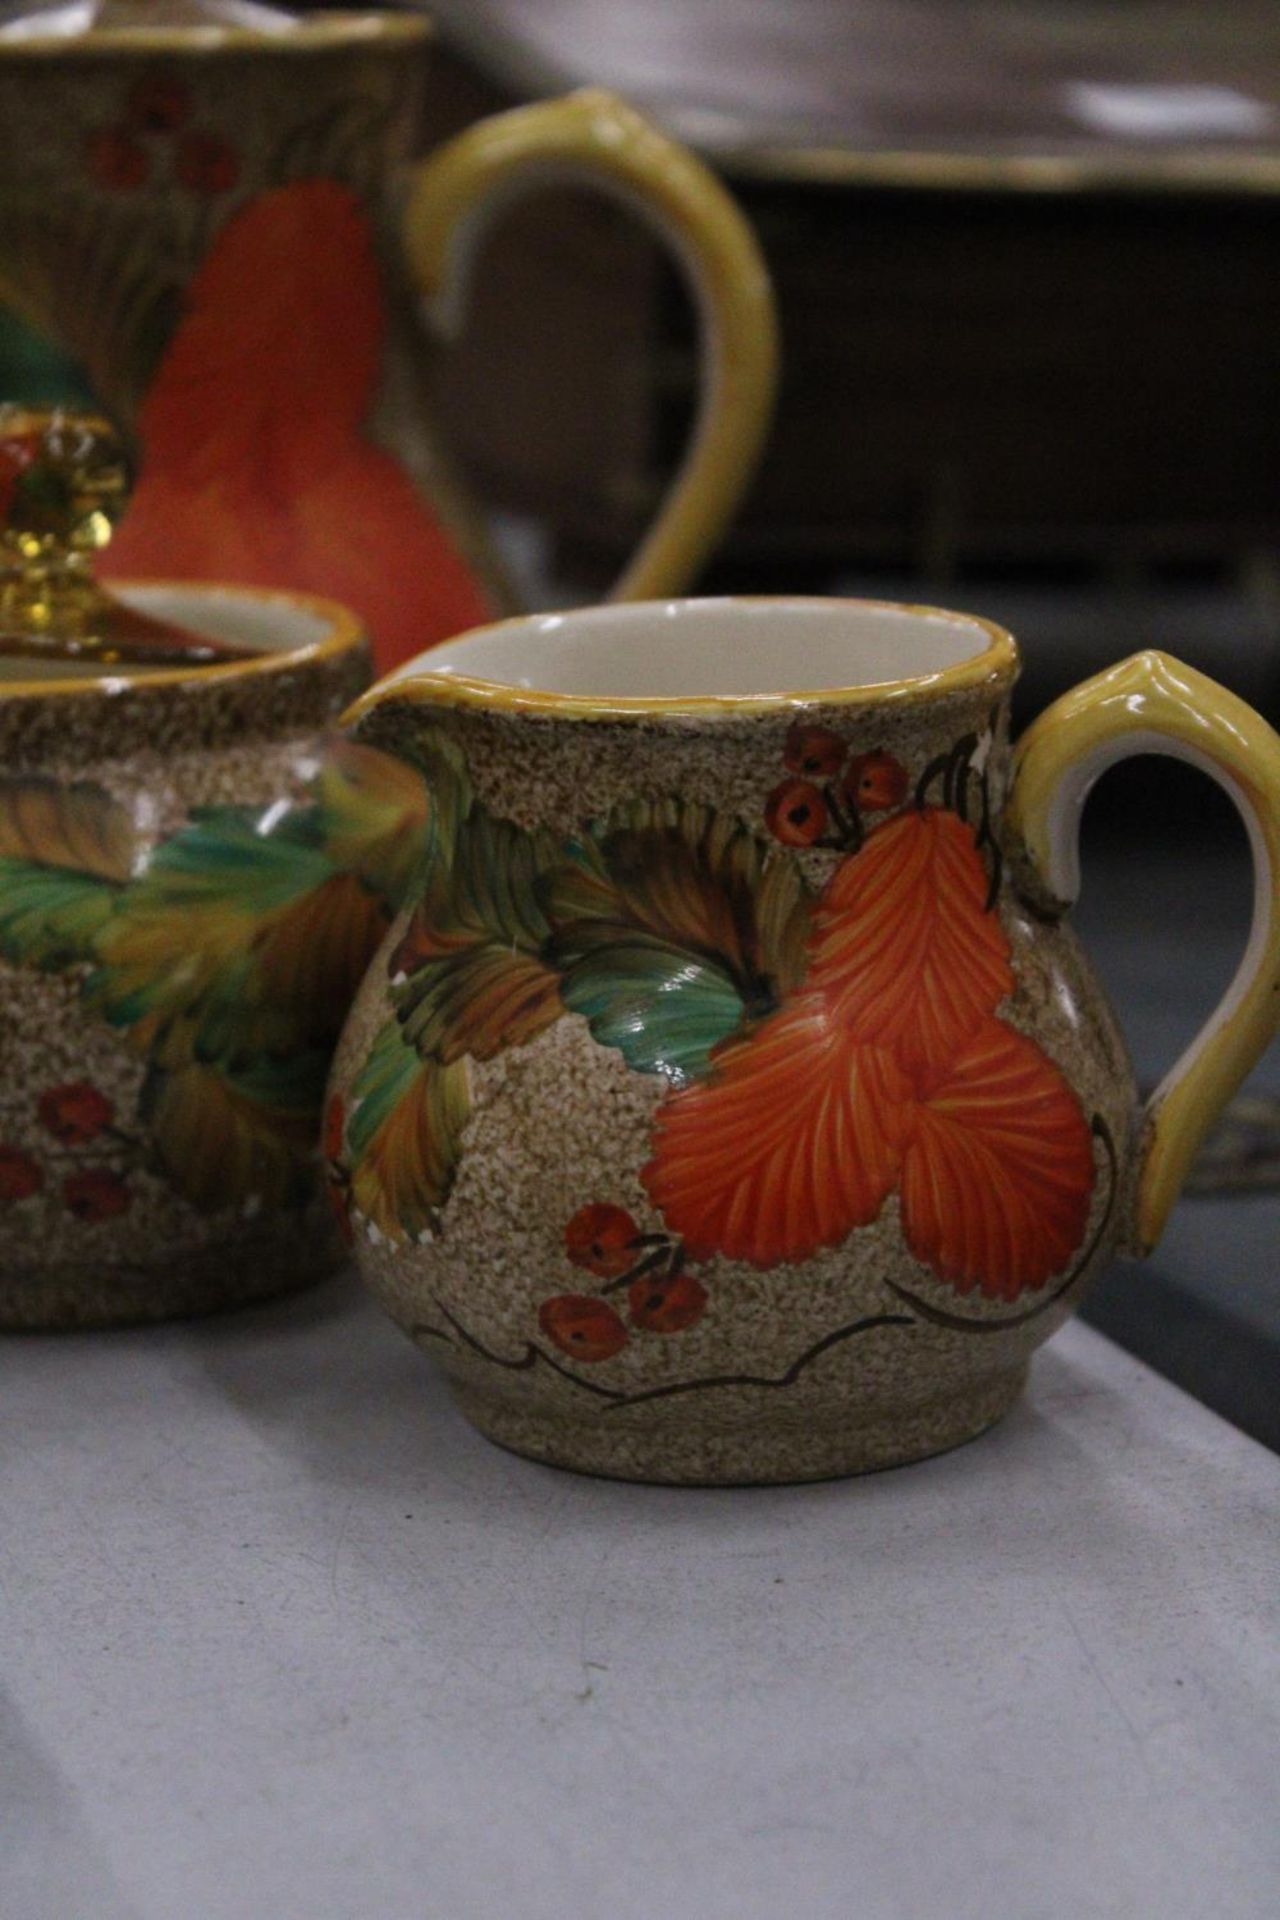 THREE PIECES OF VINTAGE SUDLOW CERAMICS TO INCLUDE, A LIDDED JUG, CREAM JUG AND LIDDED SUGAR BOWL - Image 2 of 6